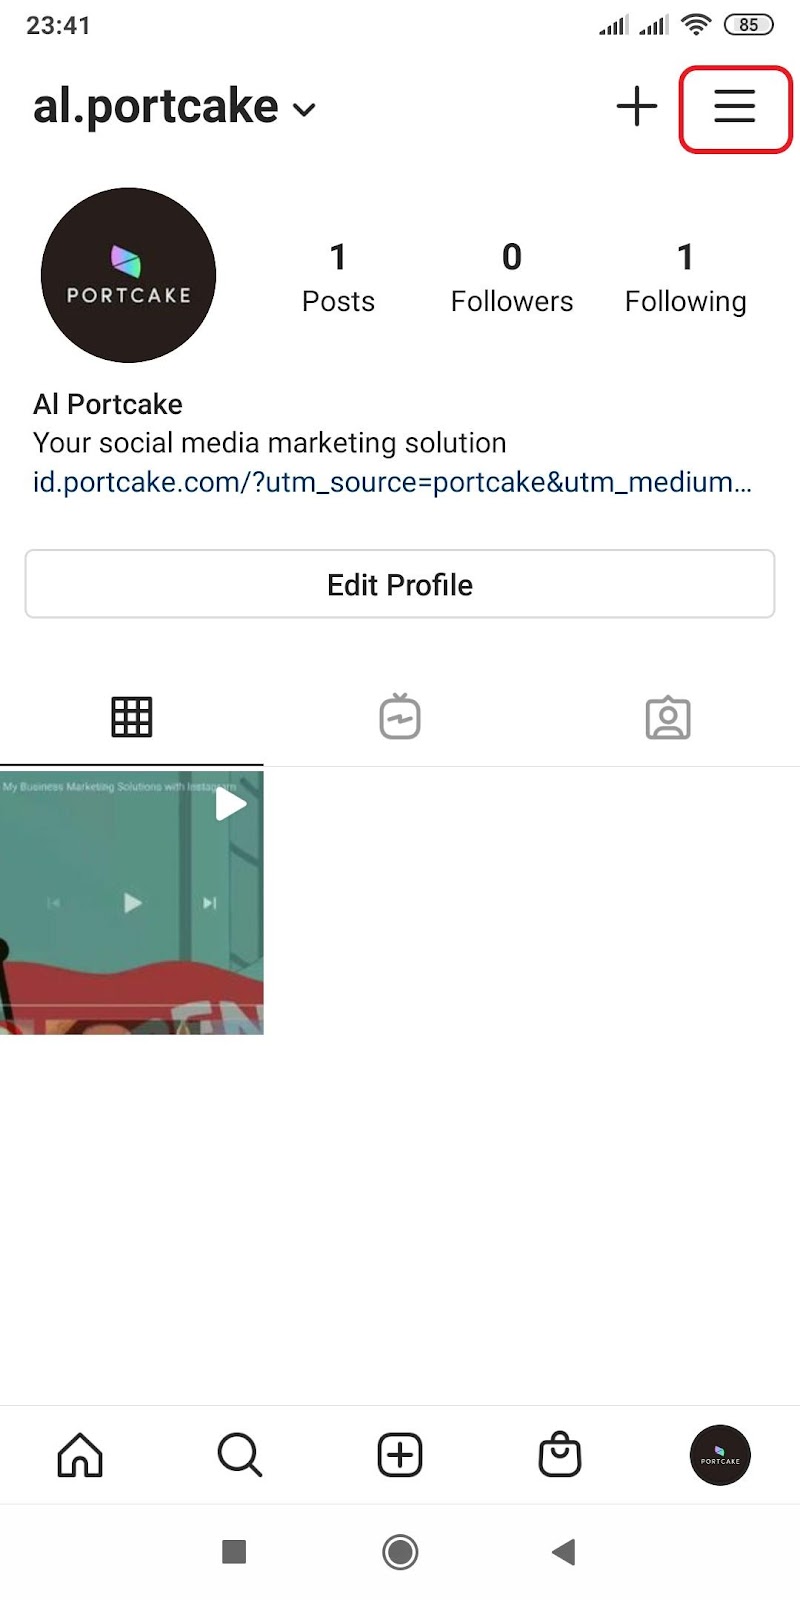 How To Switch Instagram To A Professional Account Portcake Pte Ltd Knowledge Base